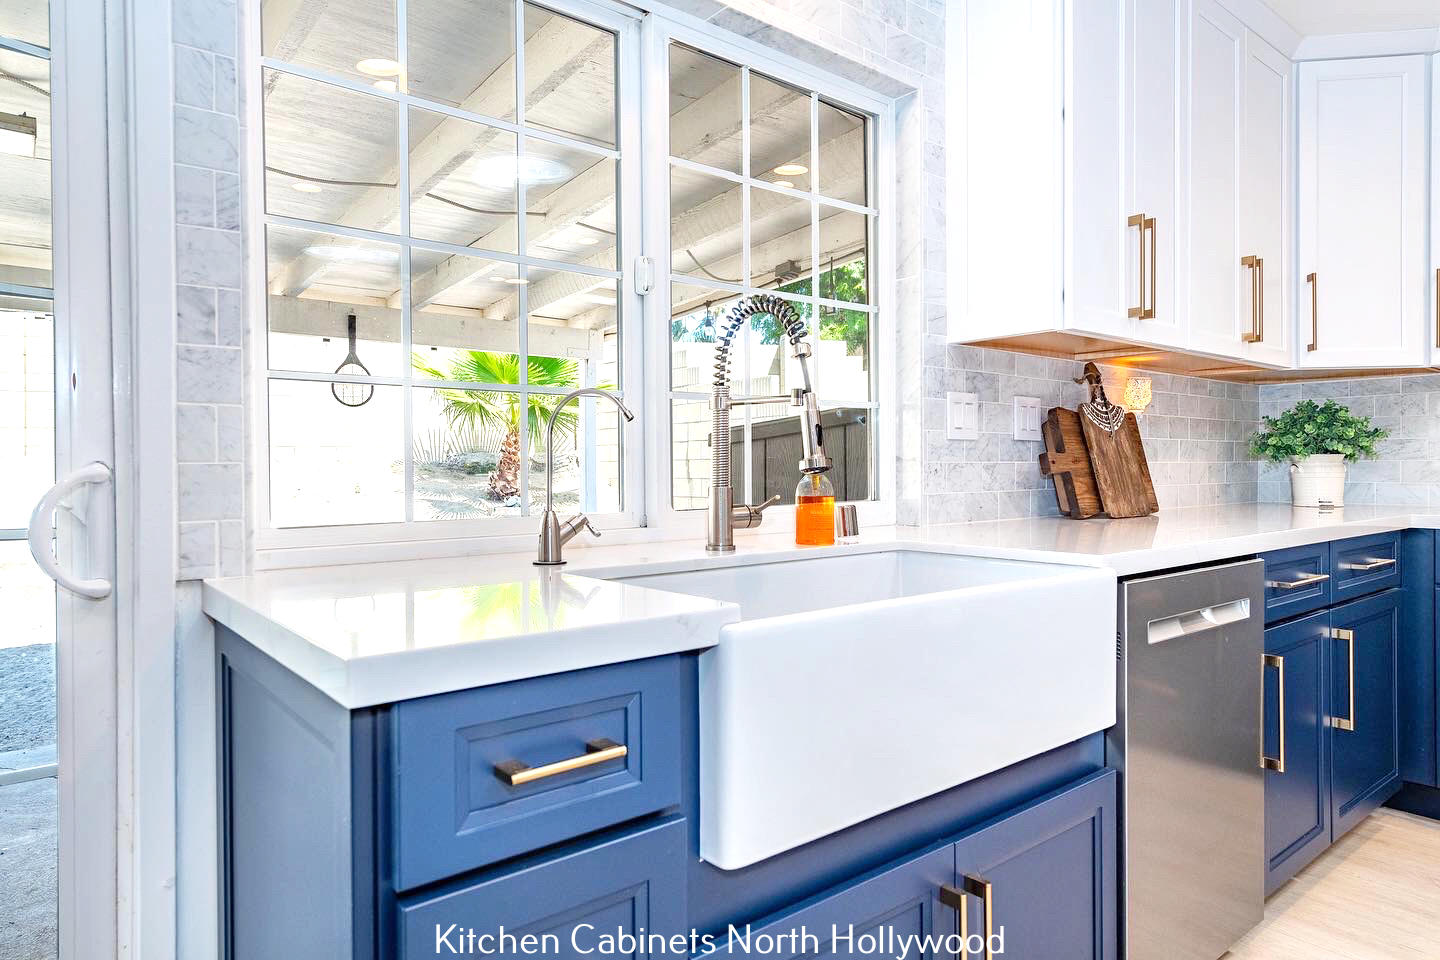 Polaris Home Design Unveils State-of-the-Art North Hollywood Kitchen Cabinet Showroom and Expands Services as Premier Kitchen Remodel Contractor